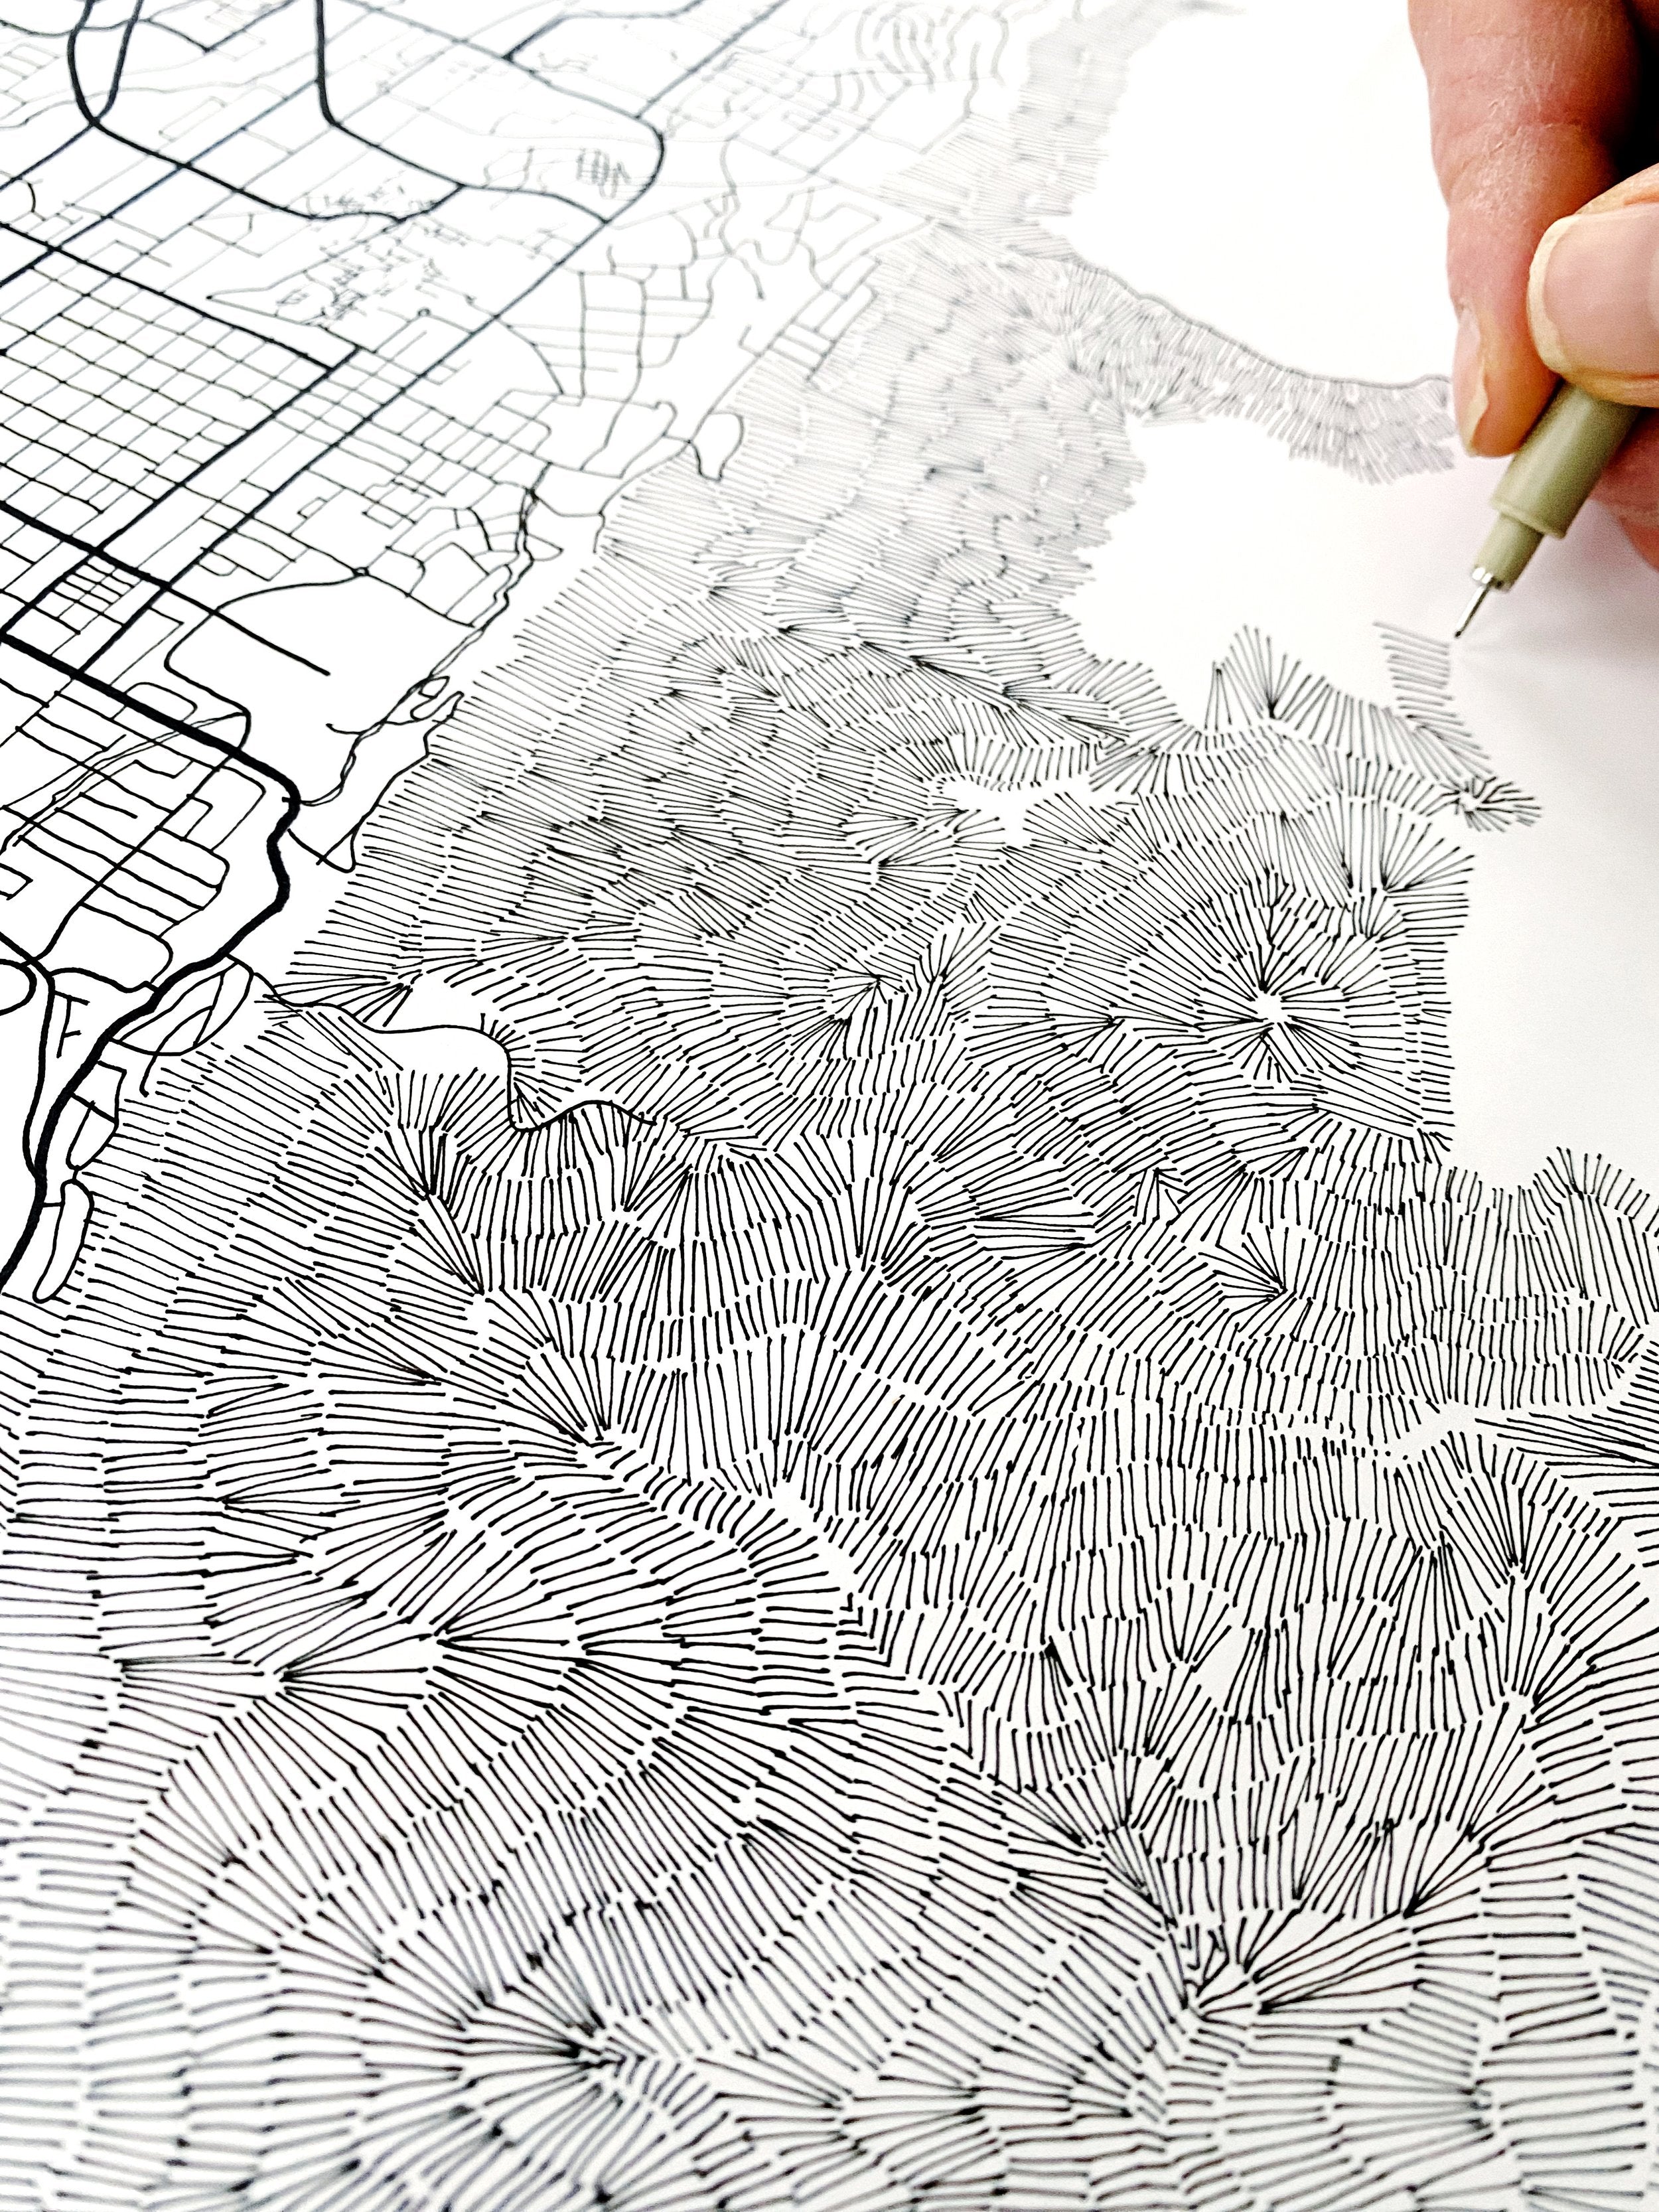 PROVO Topographical City Map Drawing: PRINT